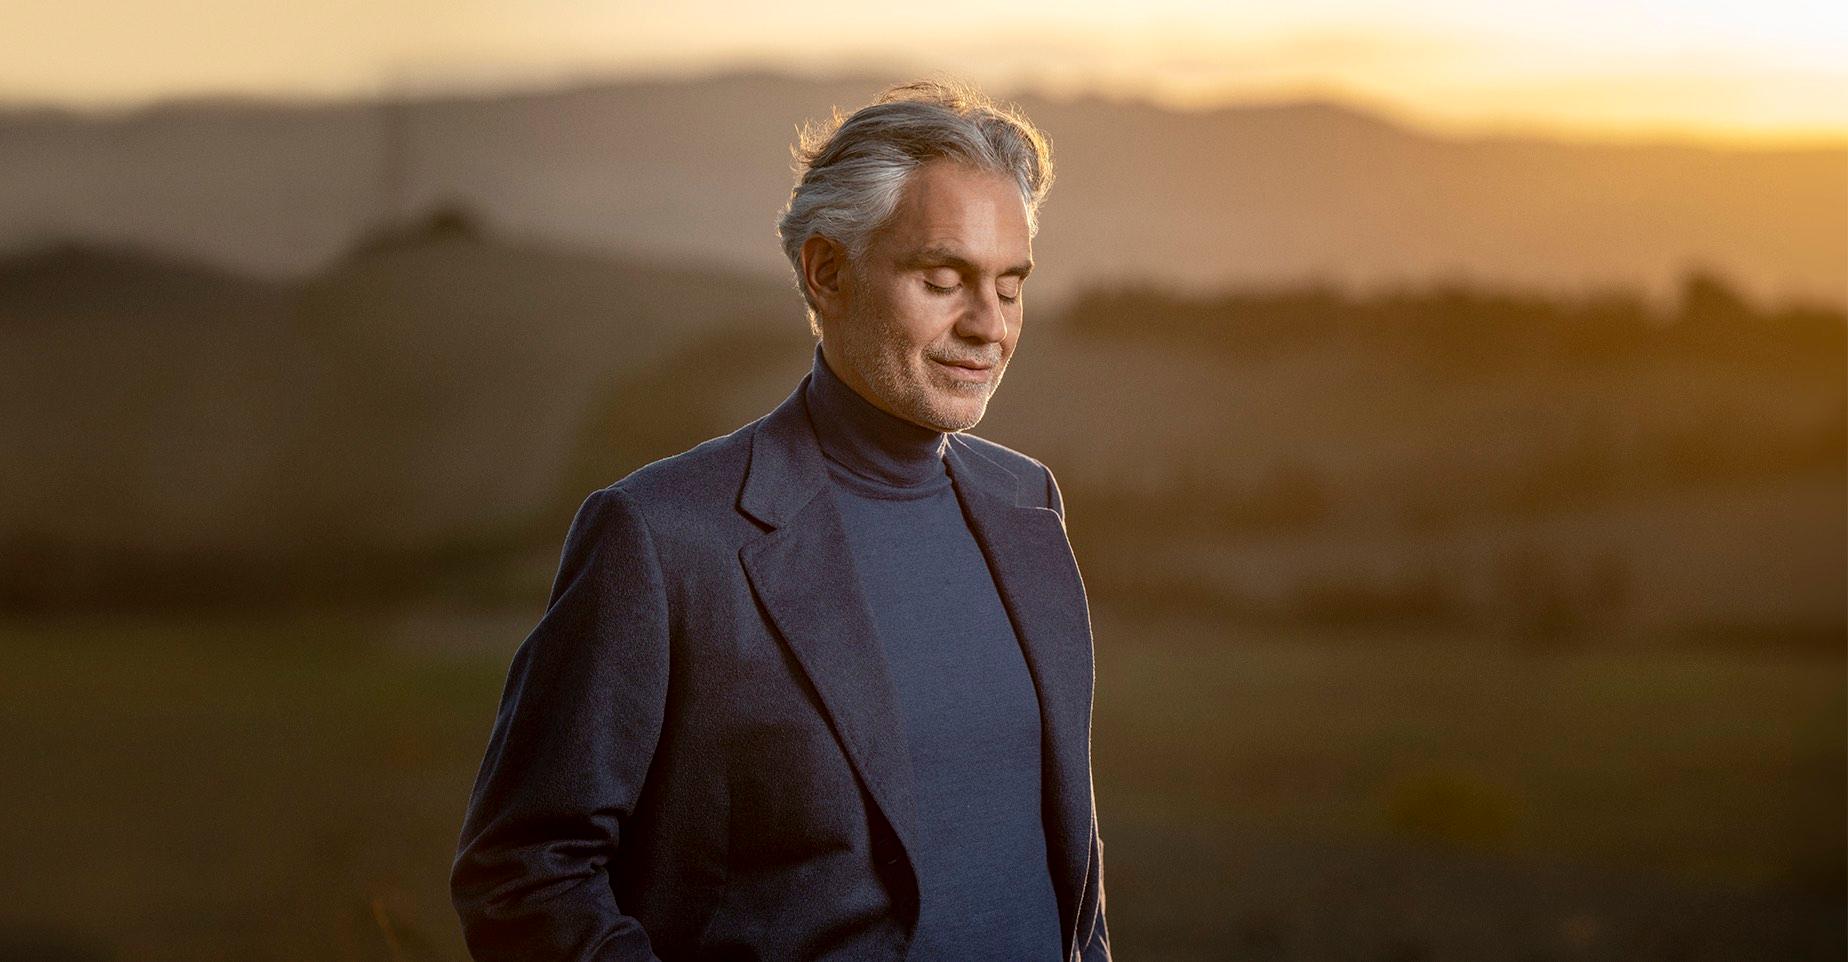 Andrea Bocelli will perform in Abu Dhabi this January